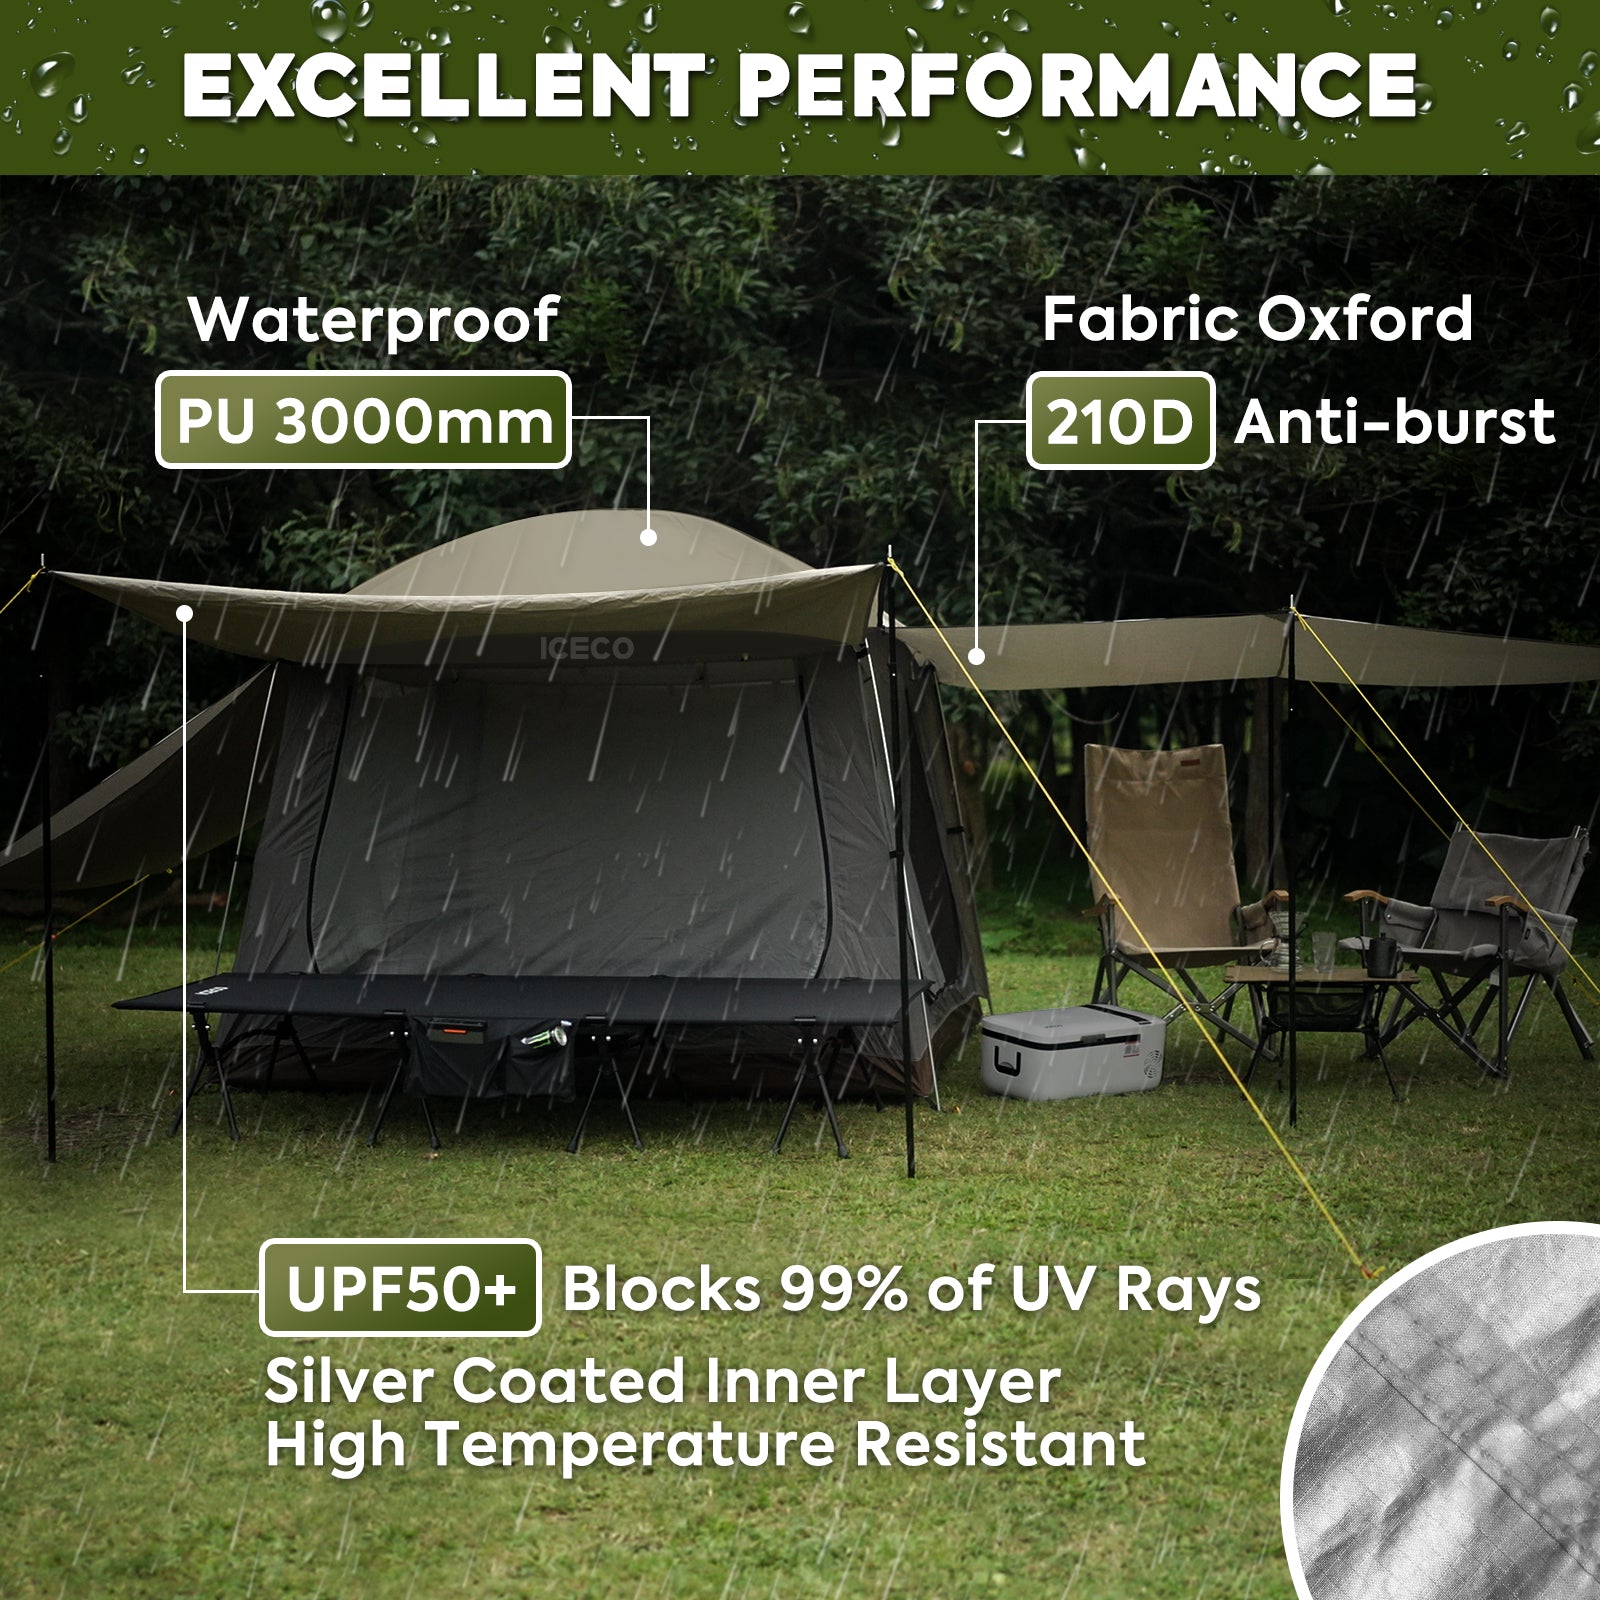 New ! 4 Person Double Layer Camping Tent | ICECO Shipping in mid-July-www.icecofreezer.com